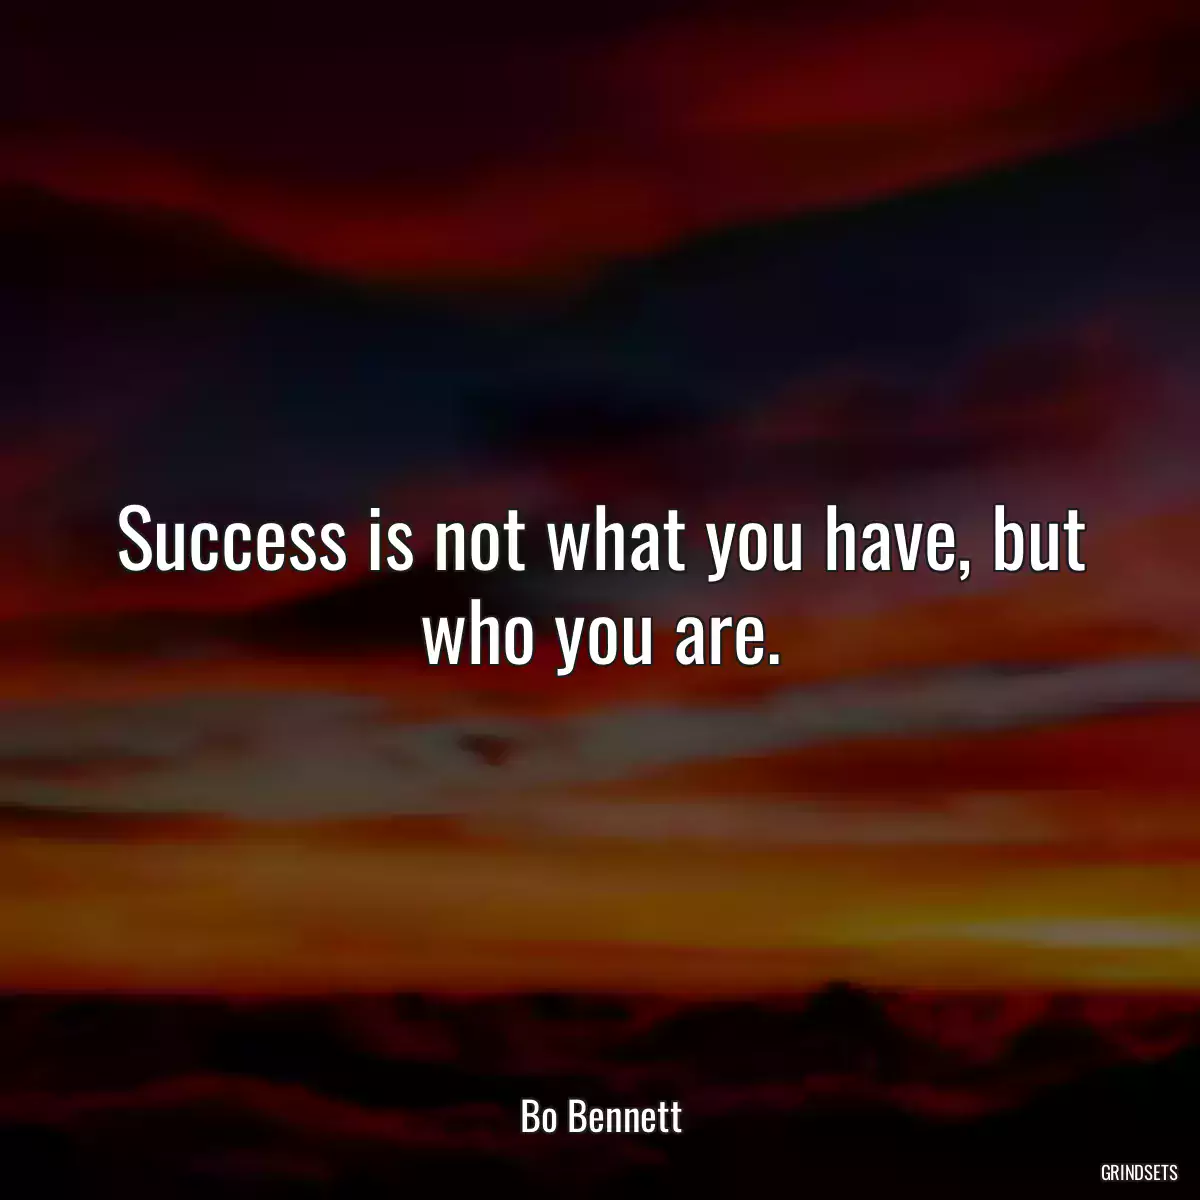 Success is not what you have, but who you are.